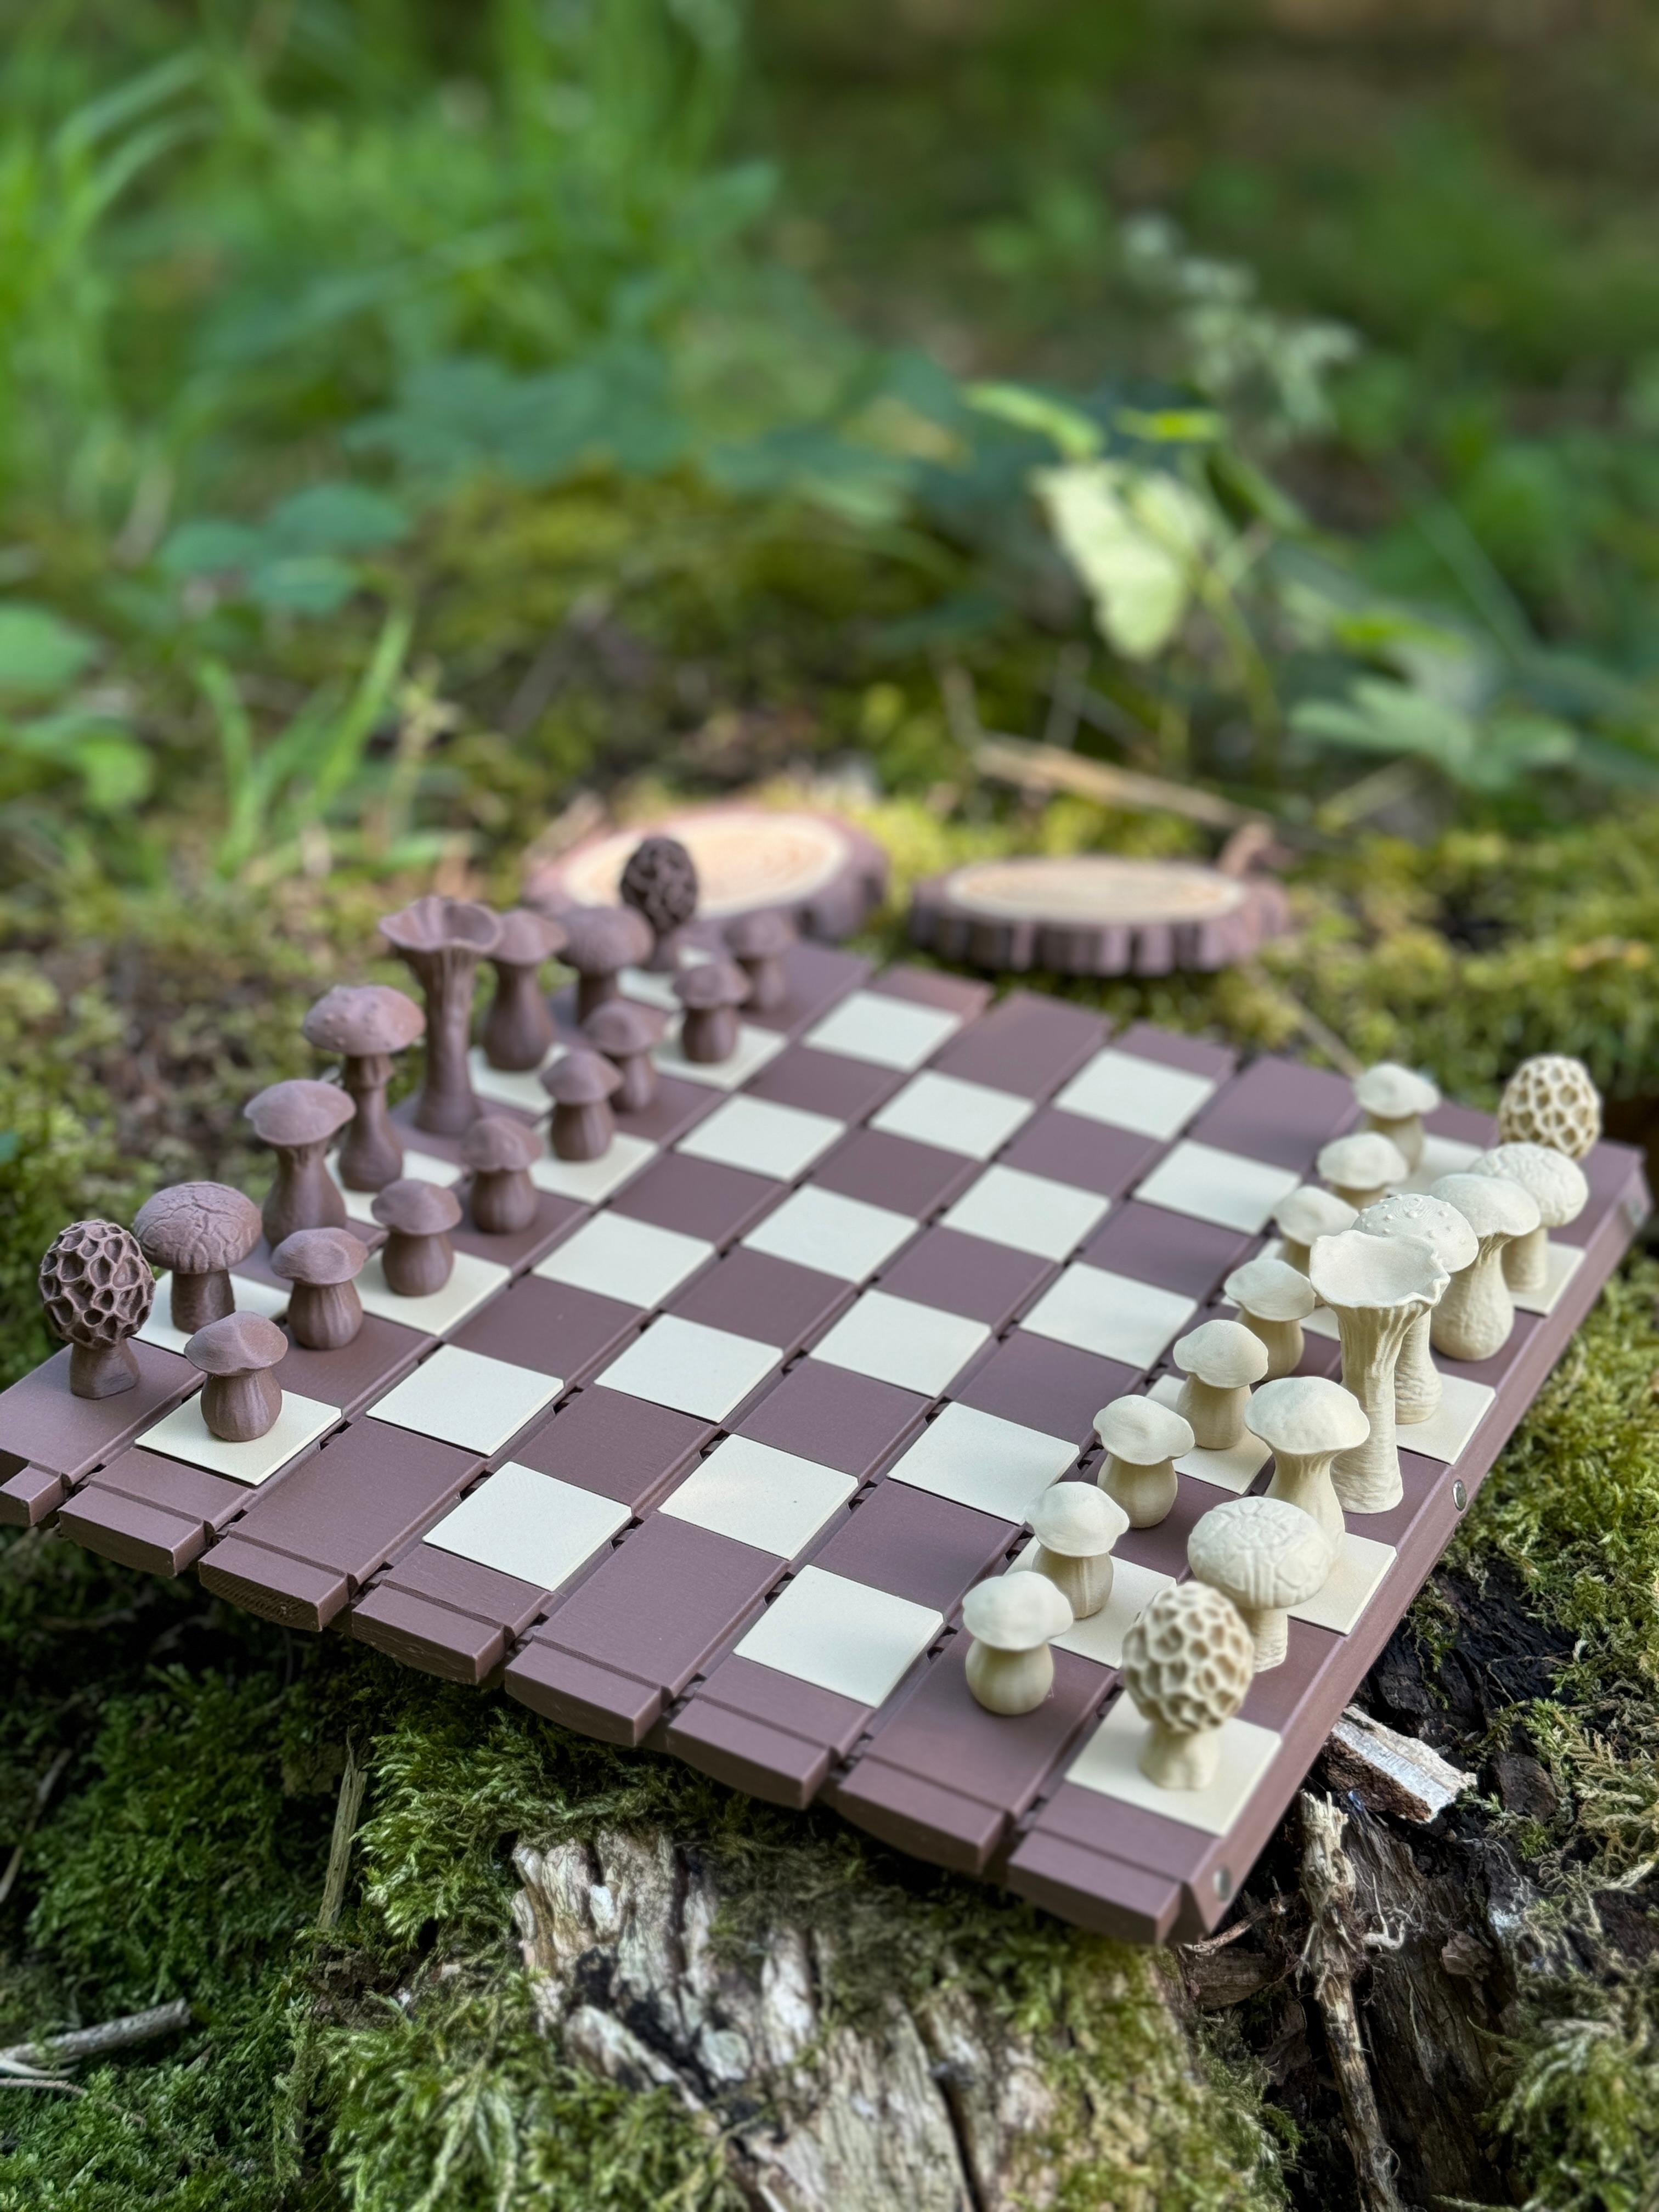 Forest Chess Set - Log and Mushroom Chess Board - Acorn Checkers - Amazing log that turns into a chessboard ! - 3d model